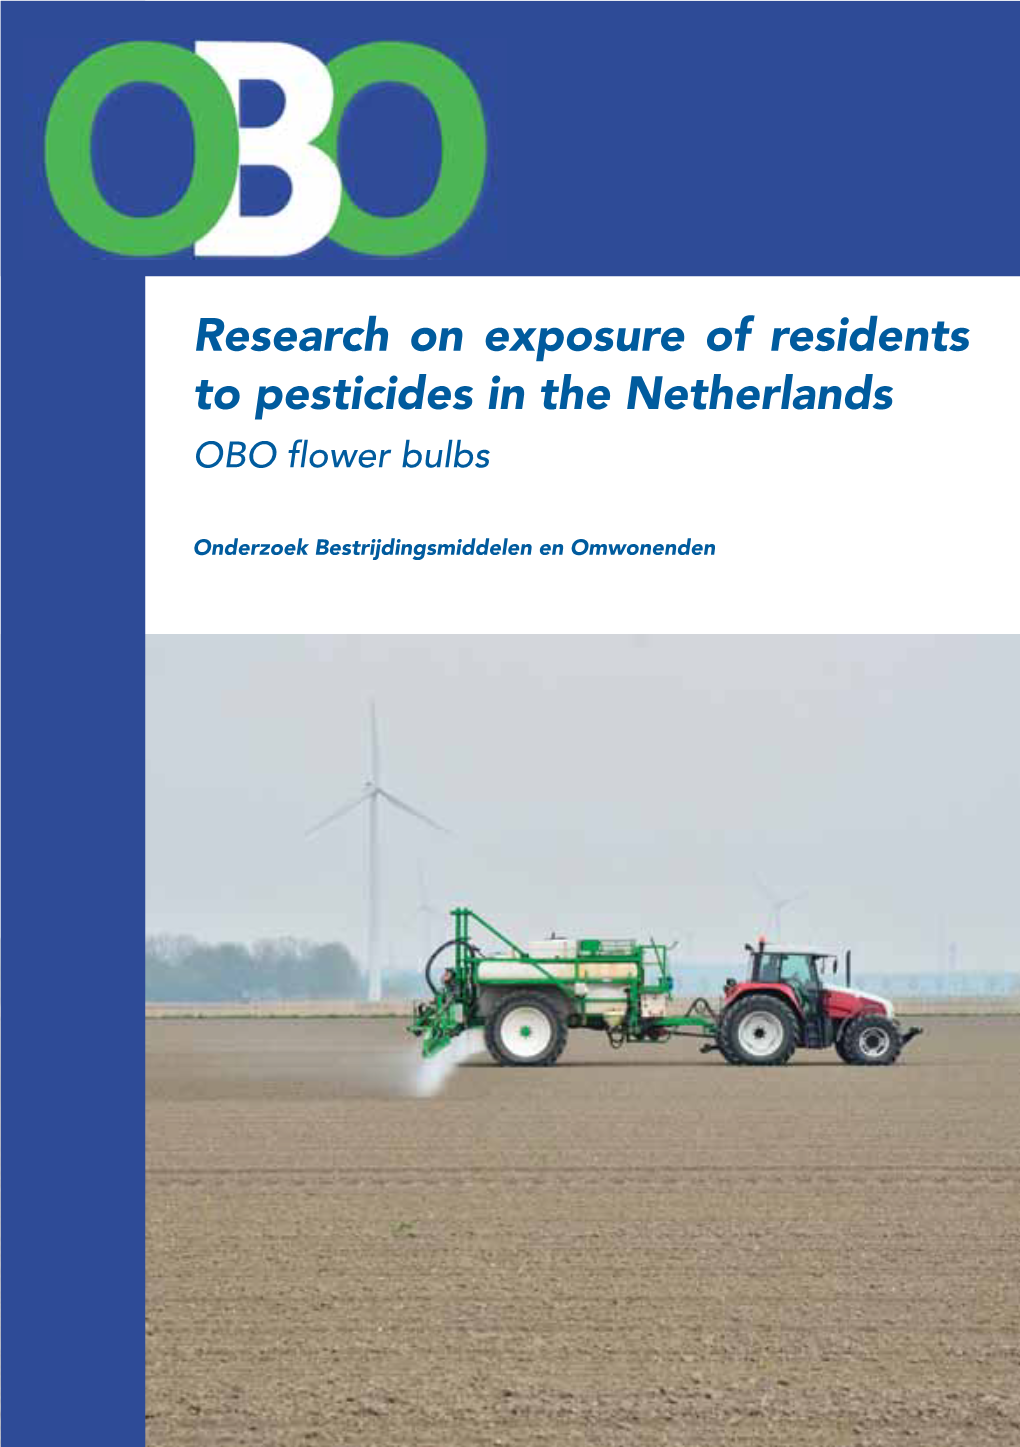 Research on Exposure of Residents to Pesticides in the Netherlands OBO Fower Bulbs